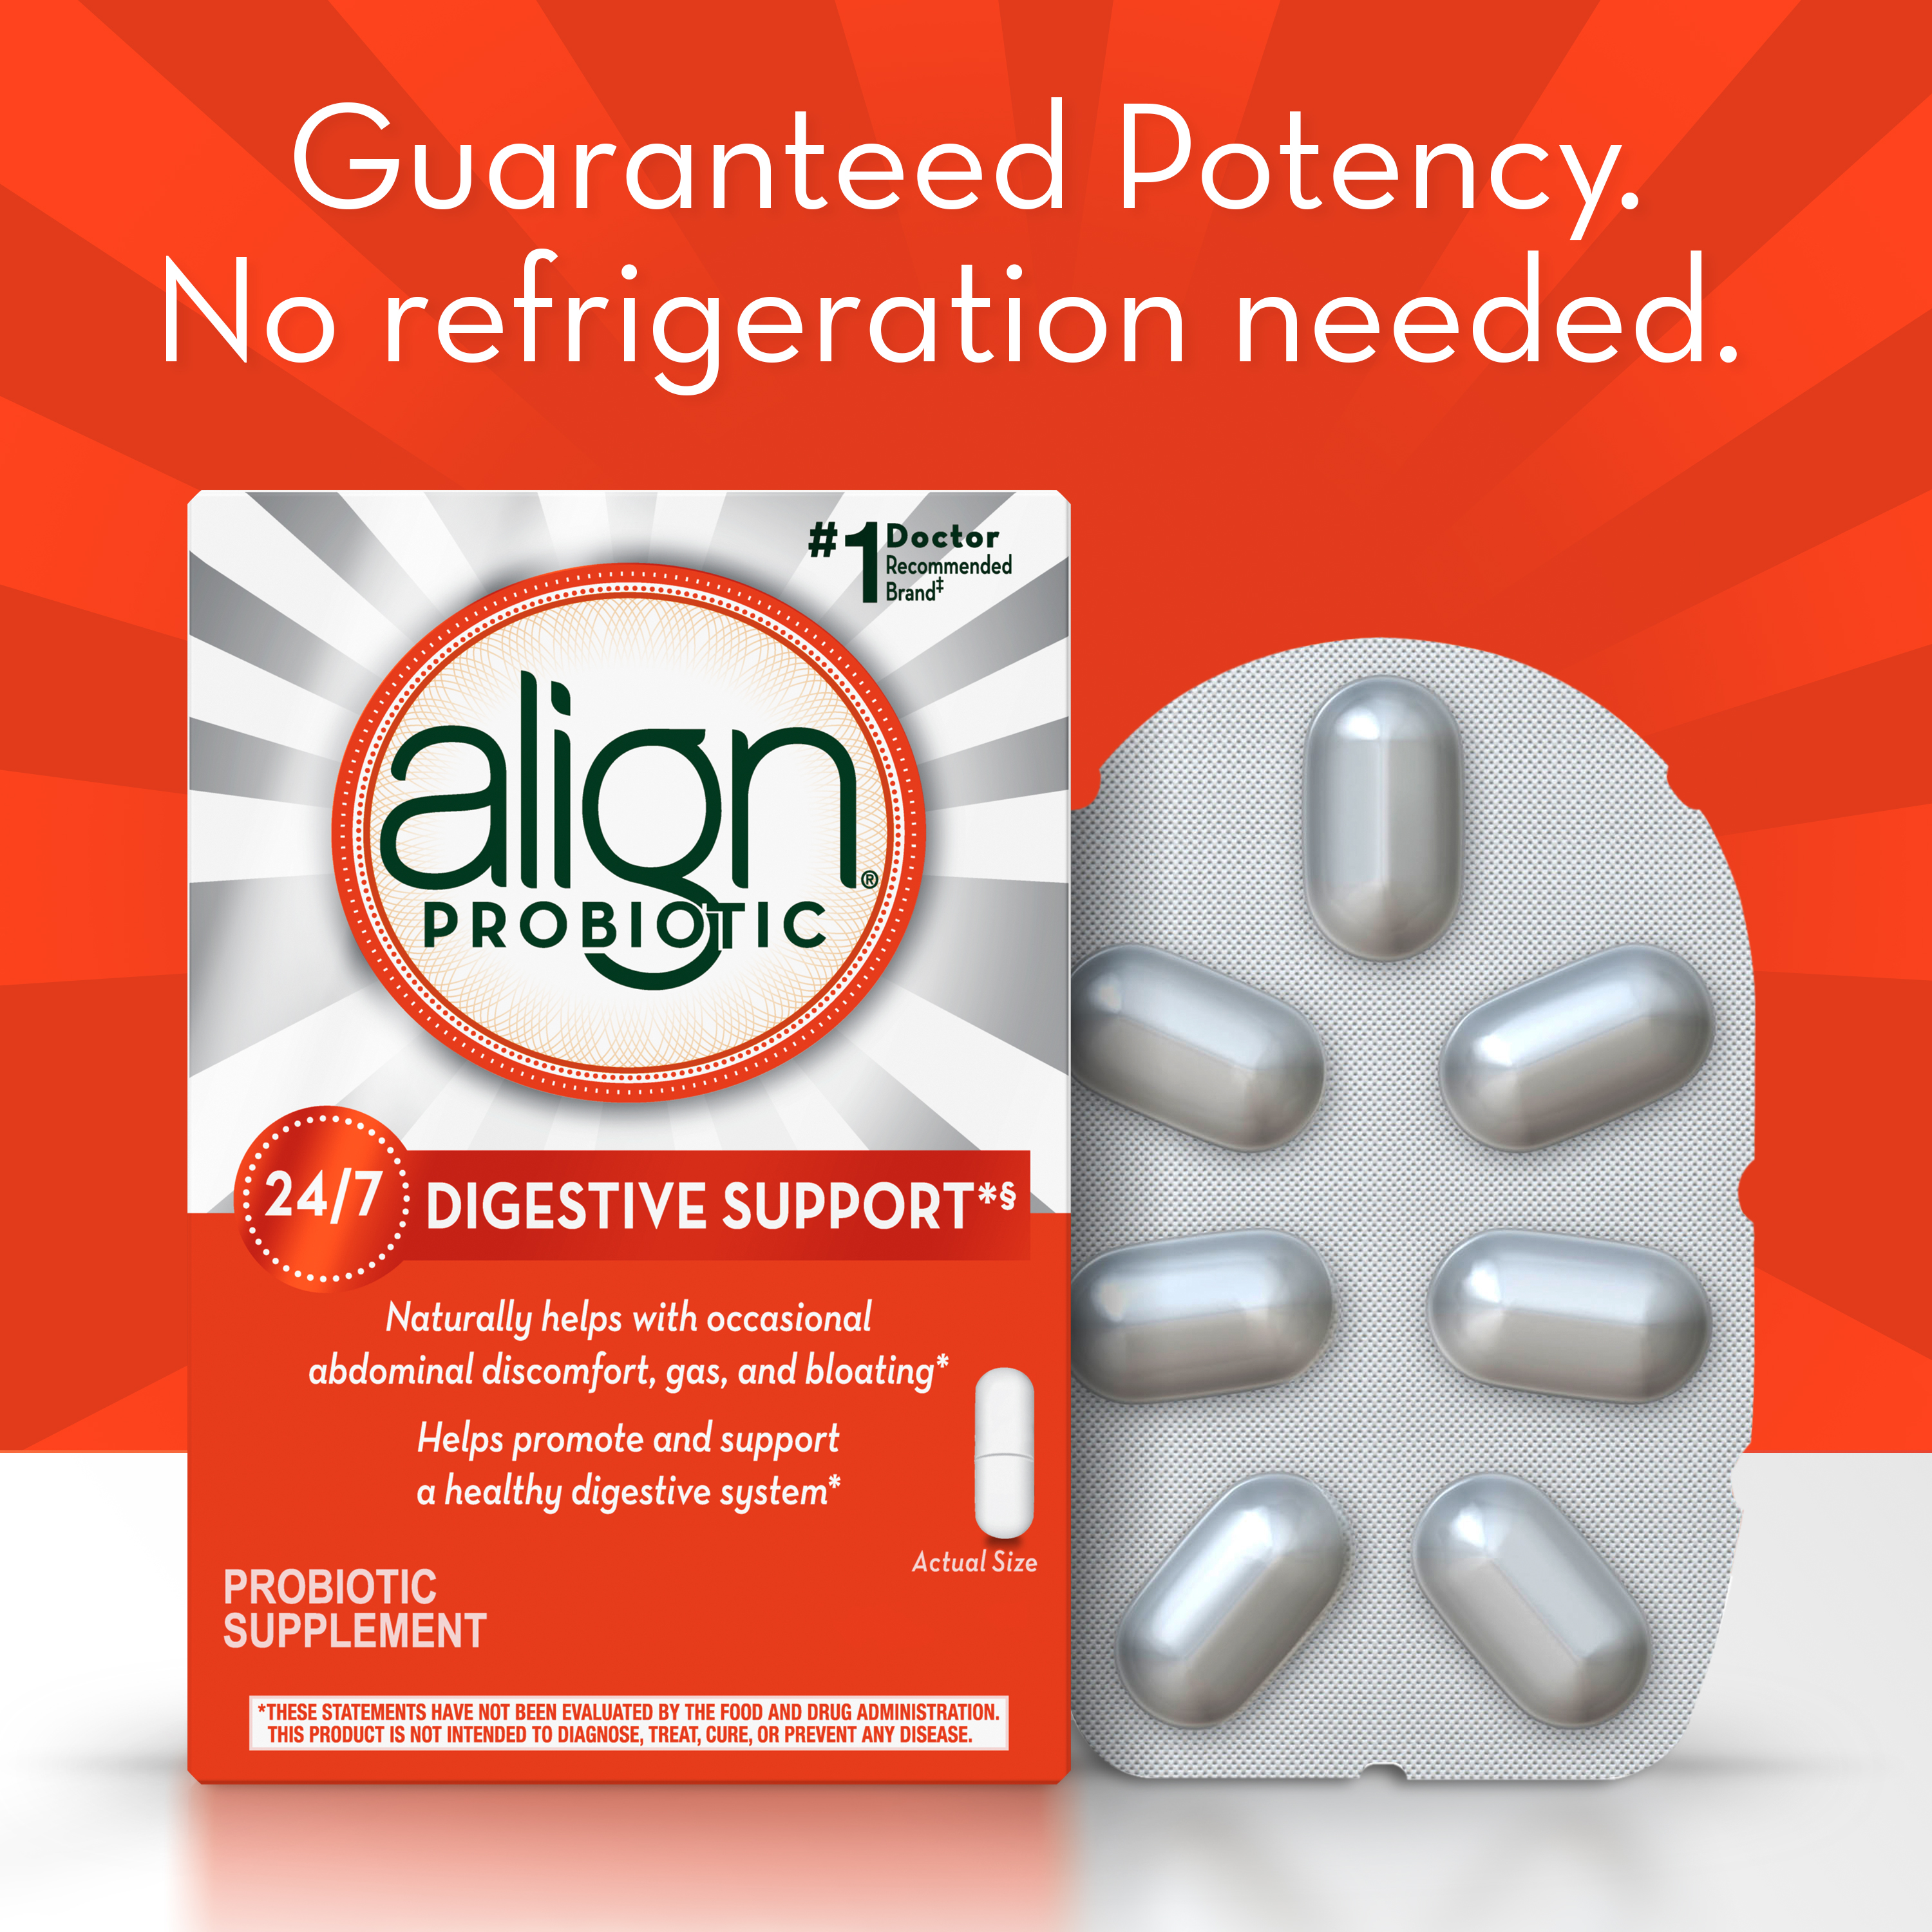 Align Probiotic Capsules, Men and Women's Daily Probiotic Supplement for Digestive Health, 28 Ct - image 5 of 11